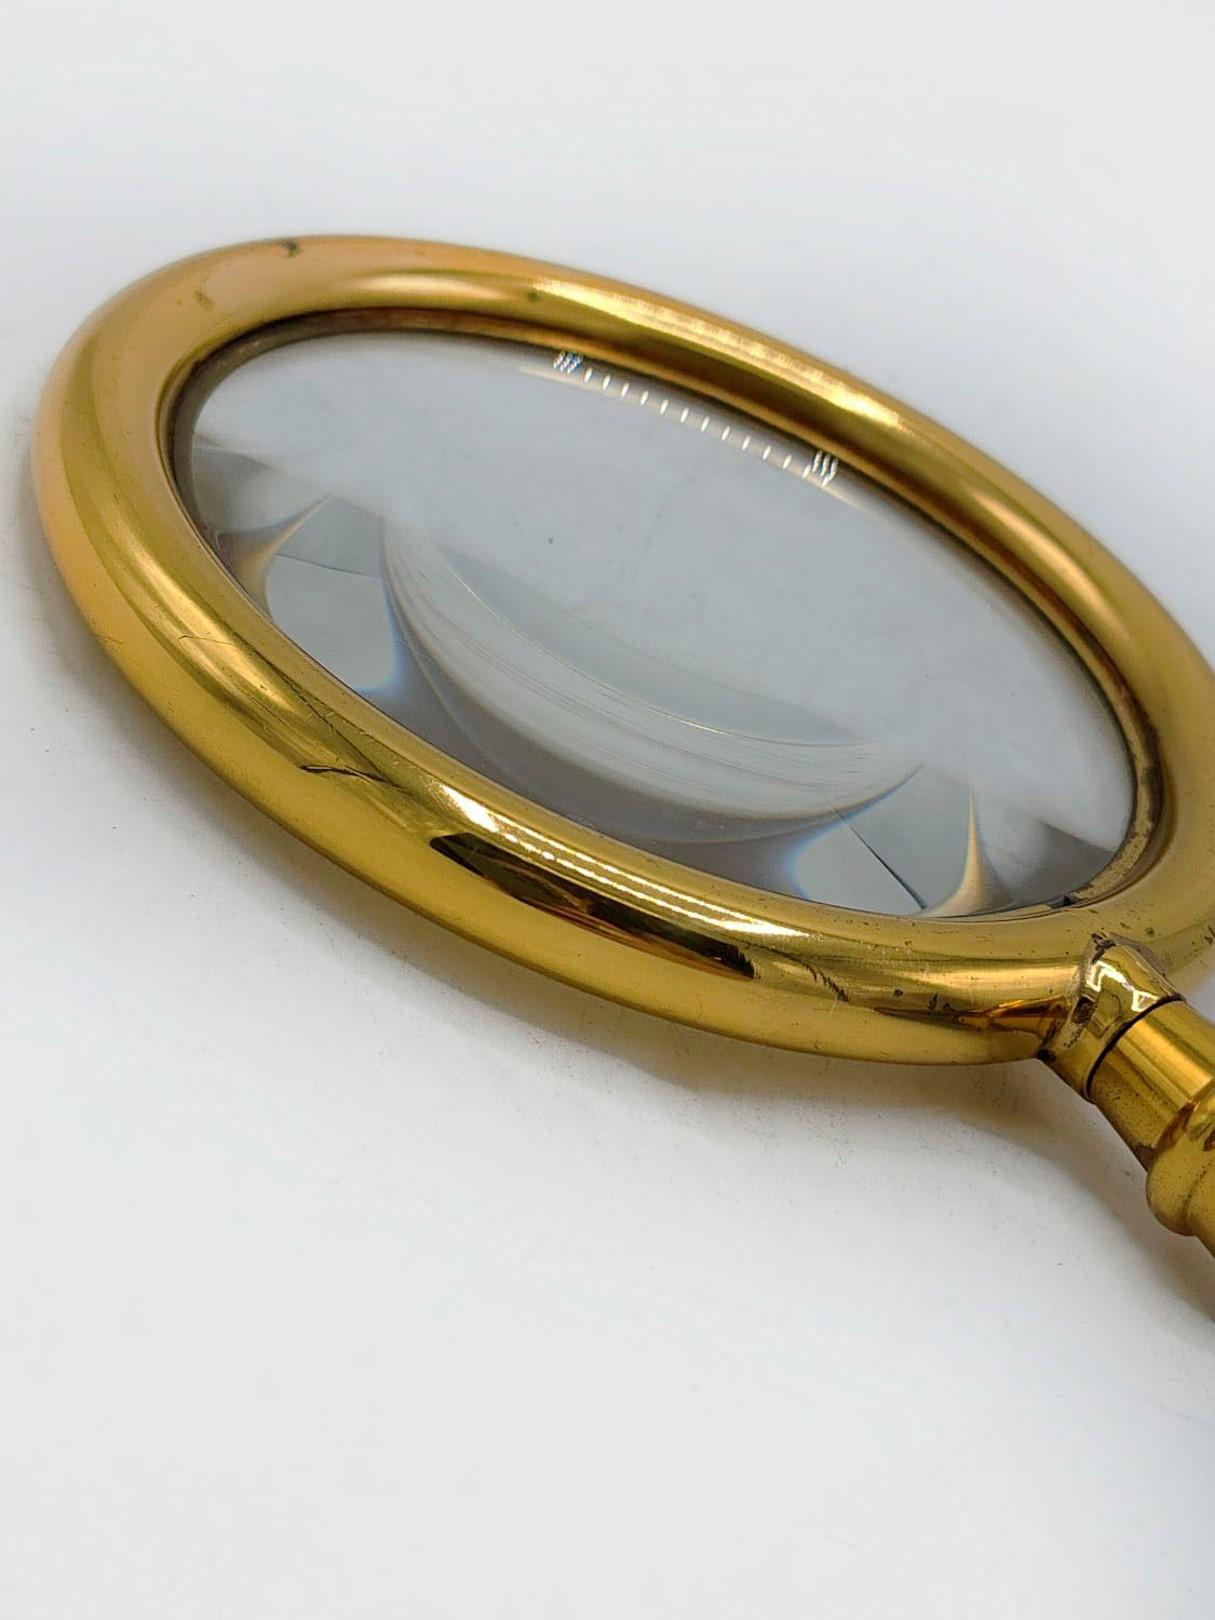 Vintage Hermes Leather and Bronze Desk Magnifying Glass

Elegant gilt bronze magnifying glass with black leather handle stamped Hermes Paris from the Art Deco style, 20th Century

Measures:
Height: 22 centimeters
Diameter: 10 centimeters
​